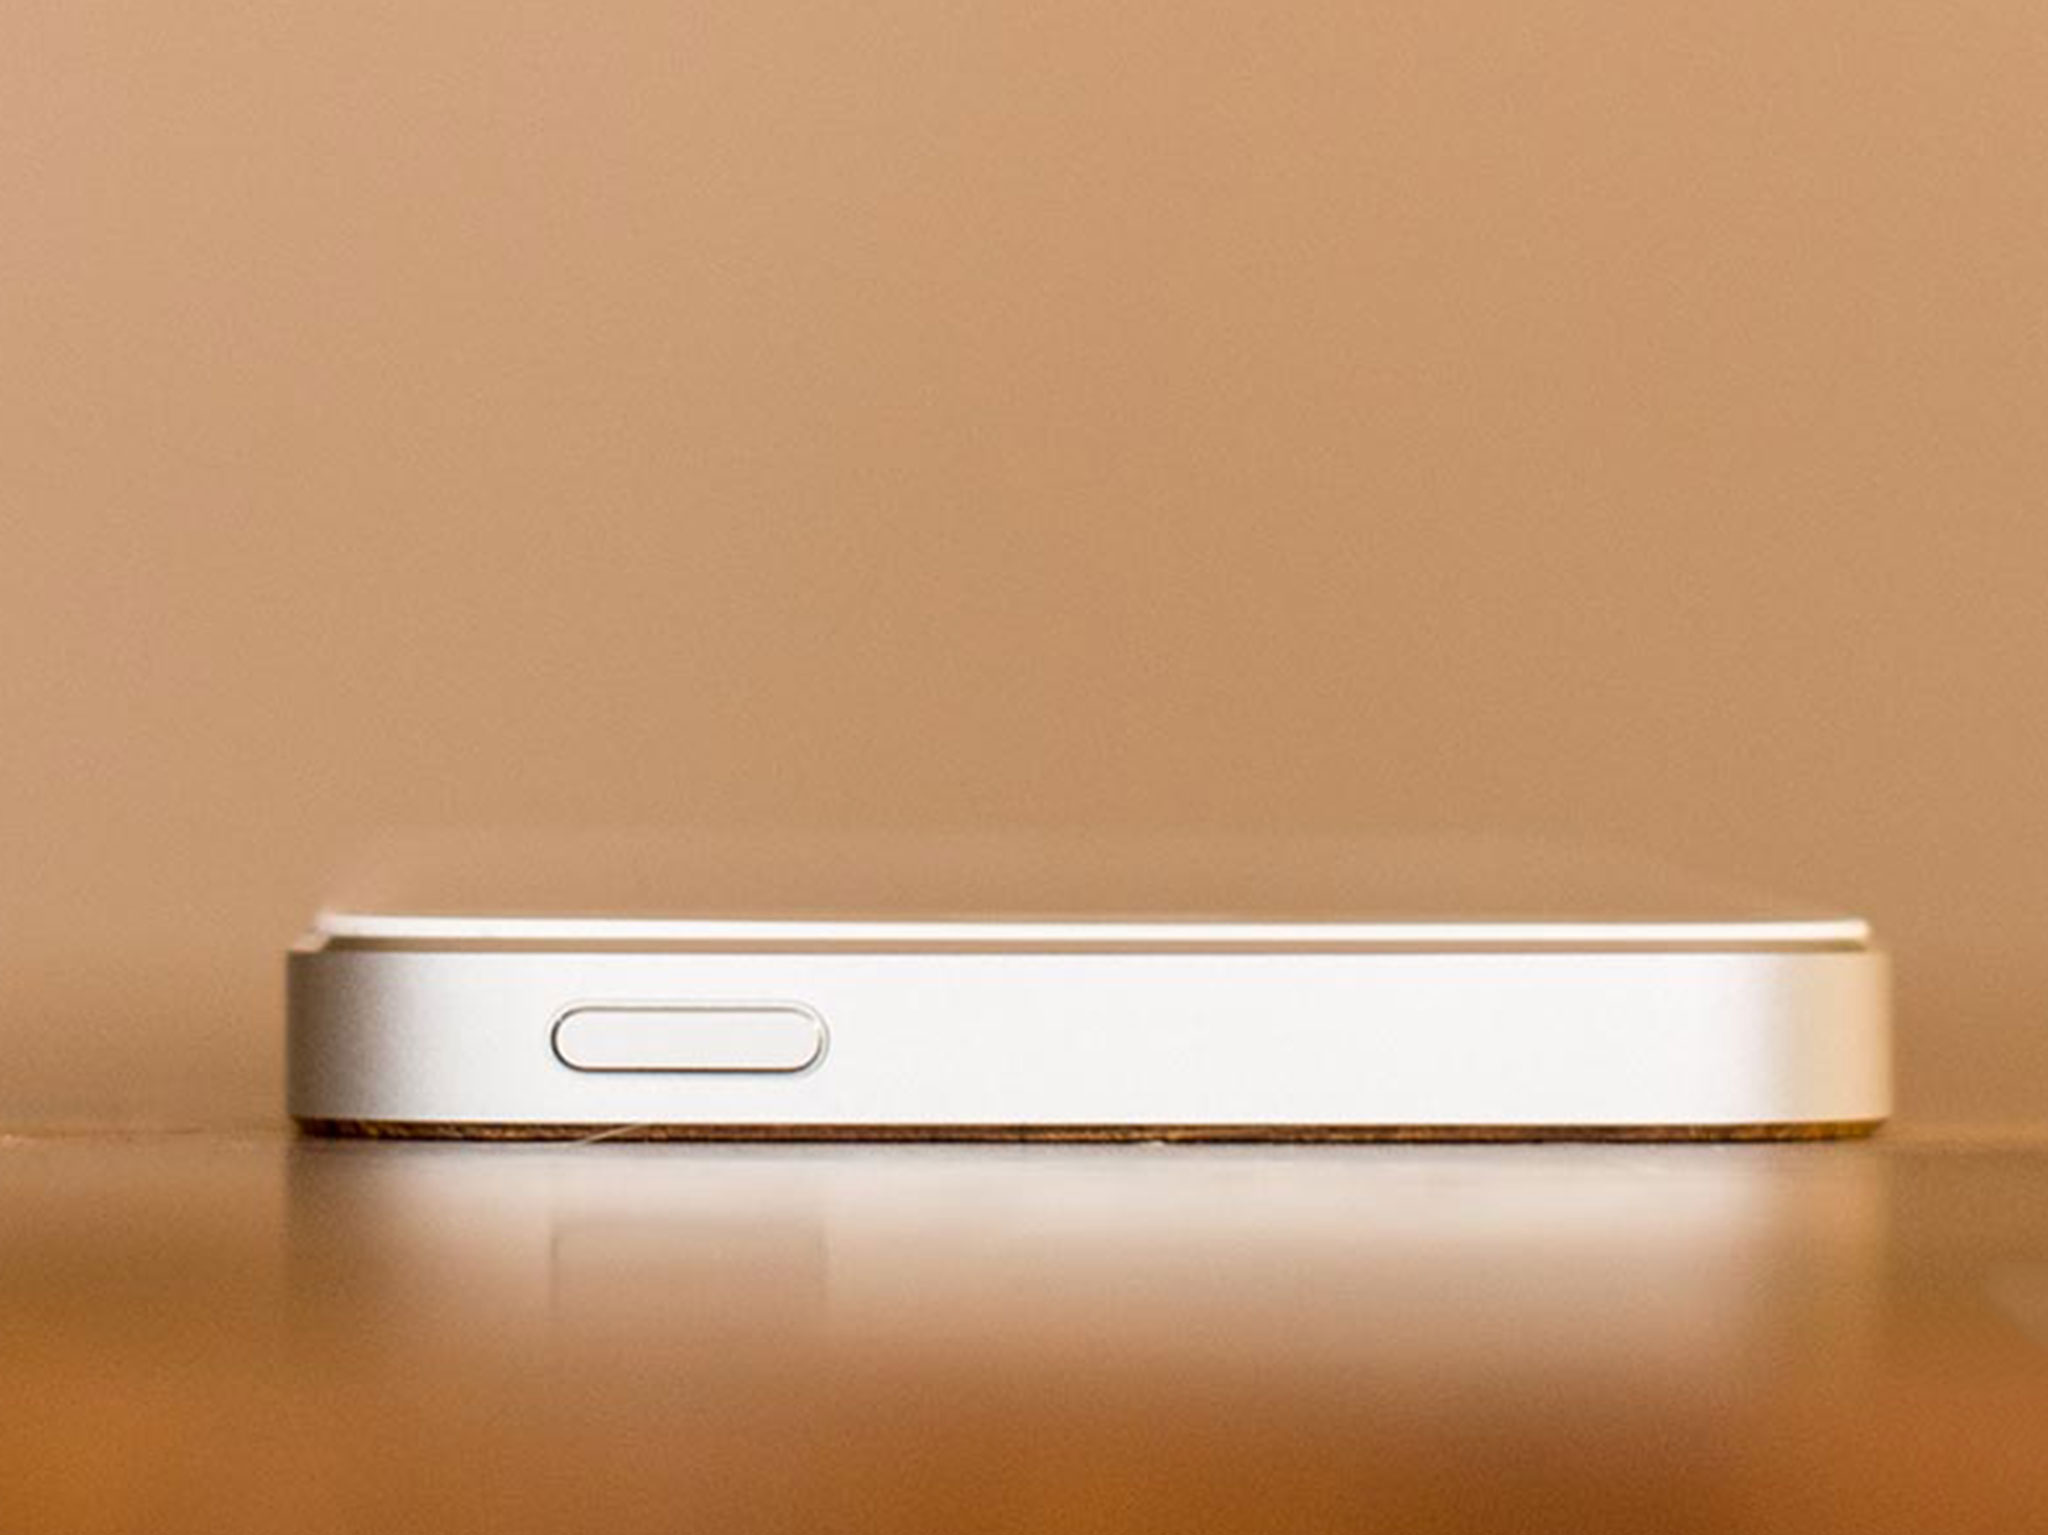 How to replace a stuck or broken iPhone power button: The ultimate guide